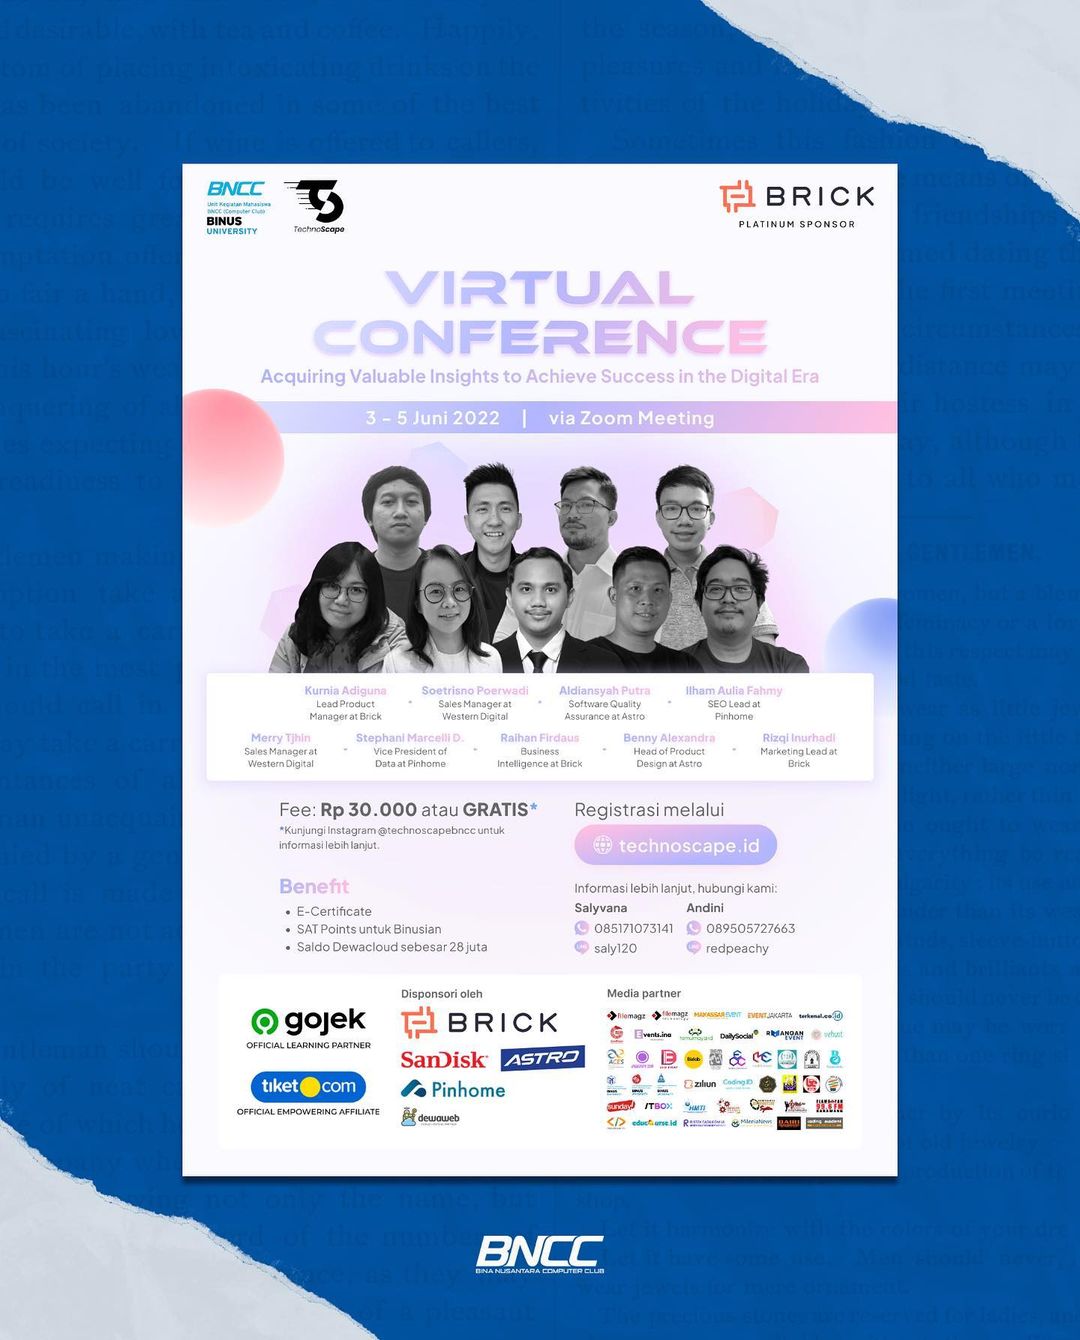 Virtual Conference: Acquiring Valuable Insights to Achieve Success in the Digital Era